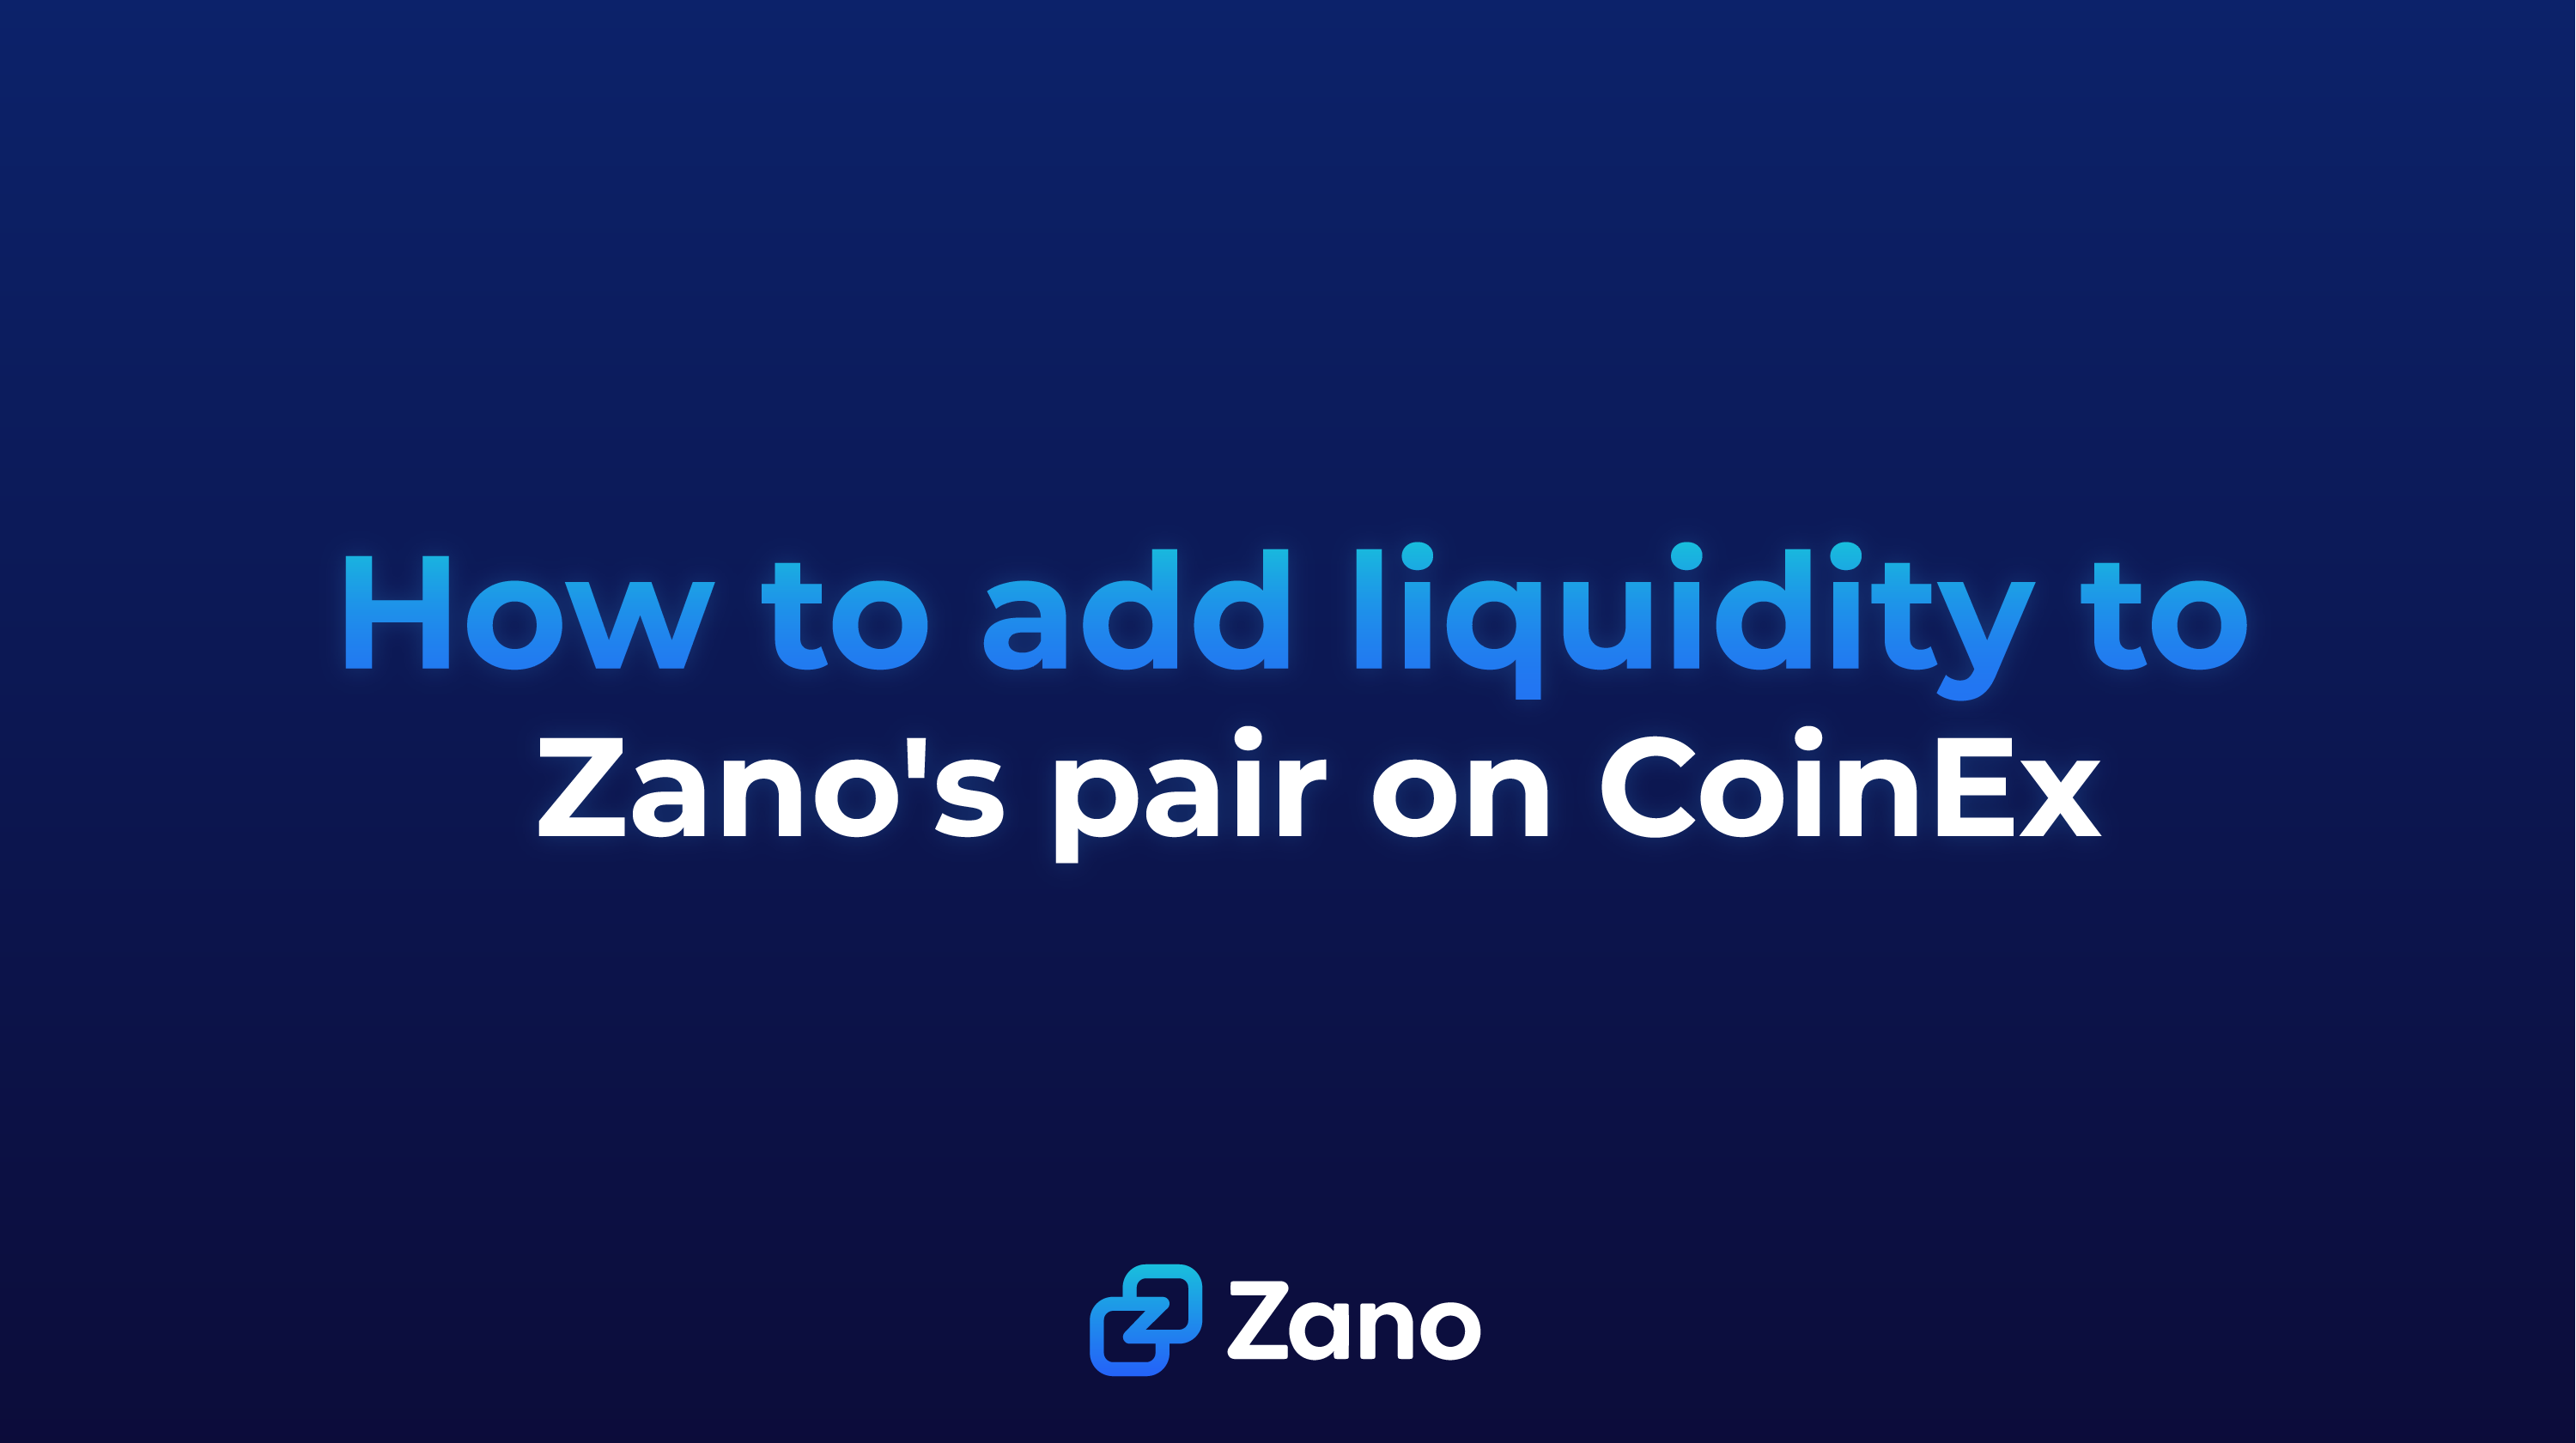 How to add liquidity to Zano's pair on CoinEx